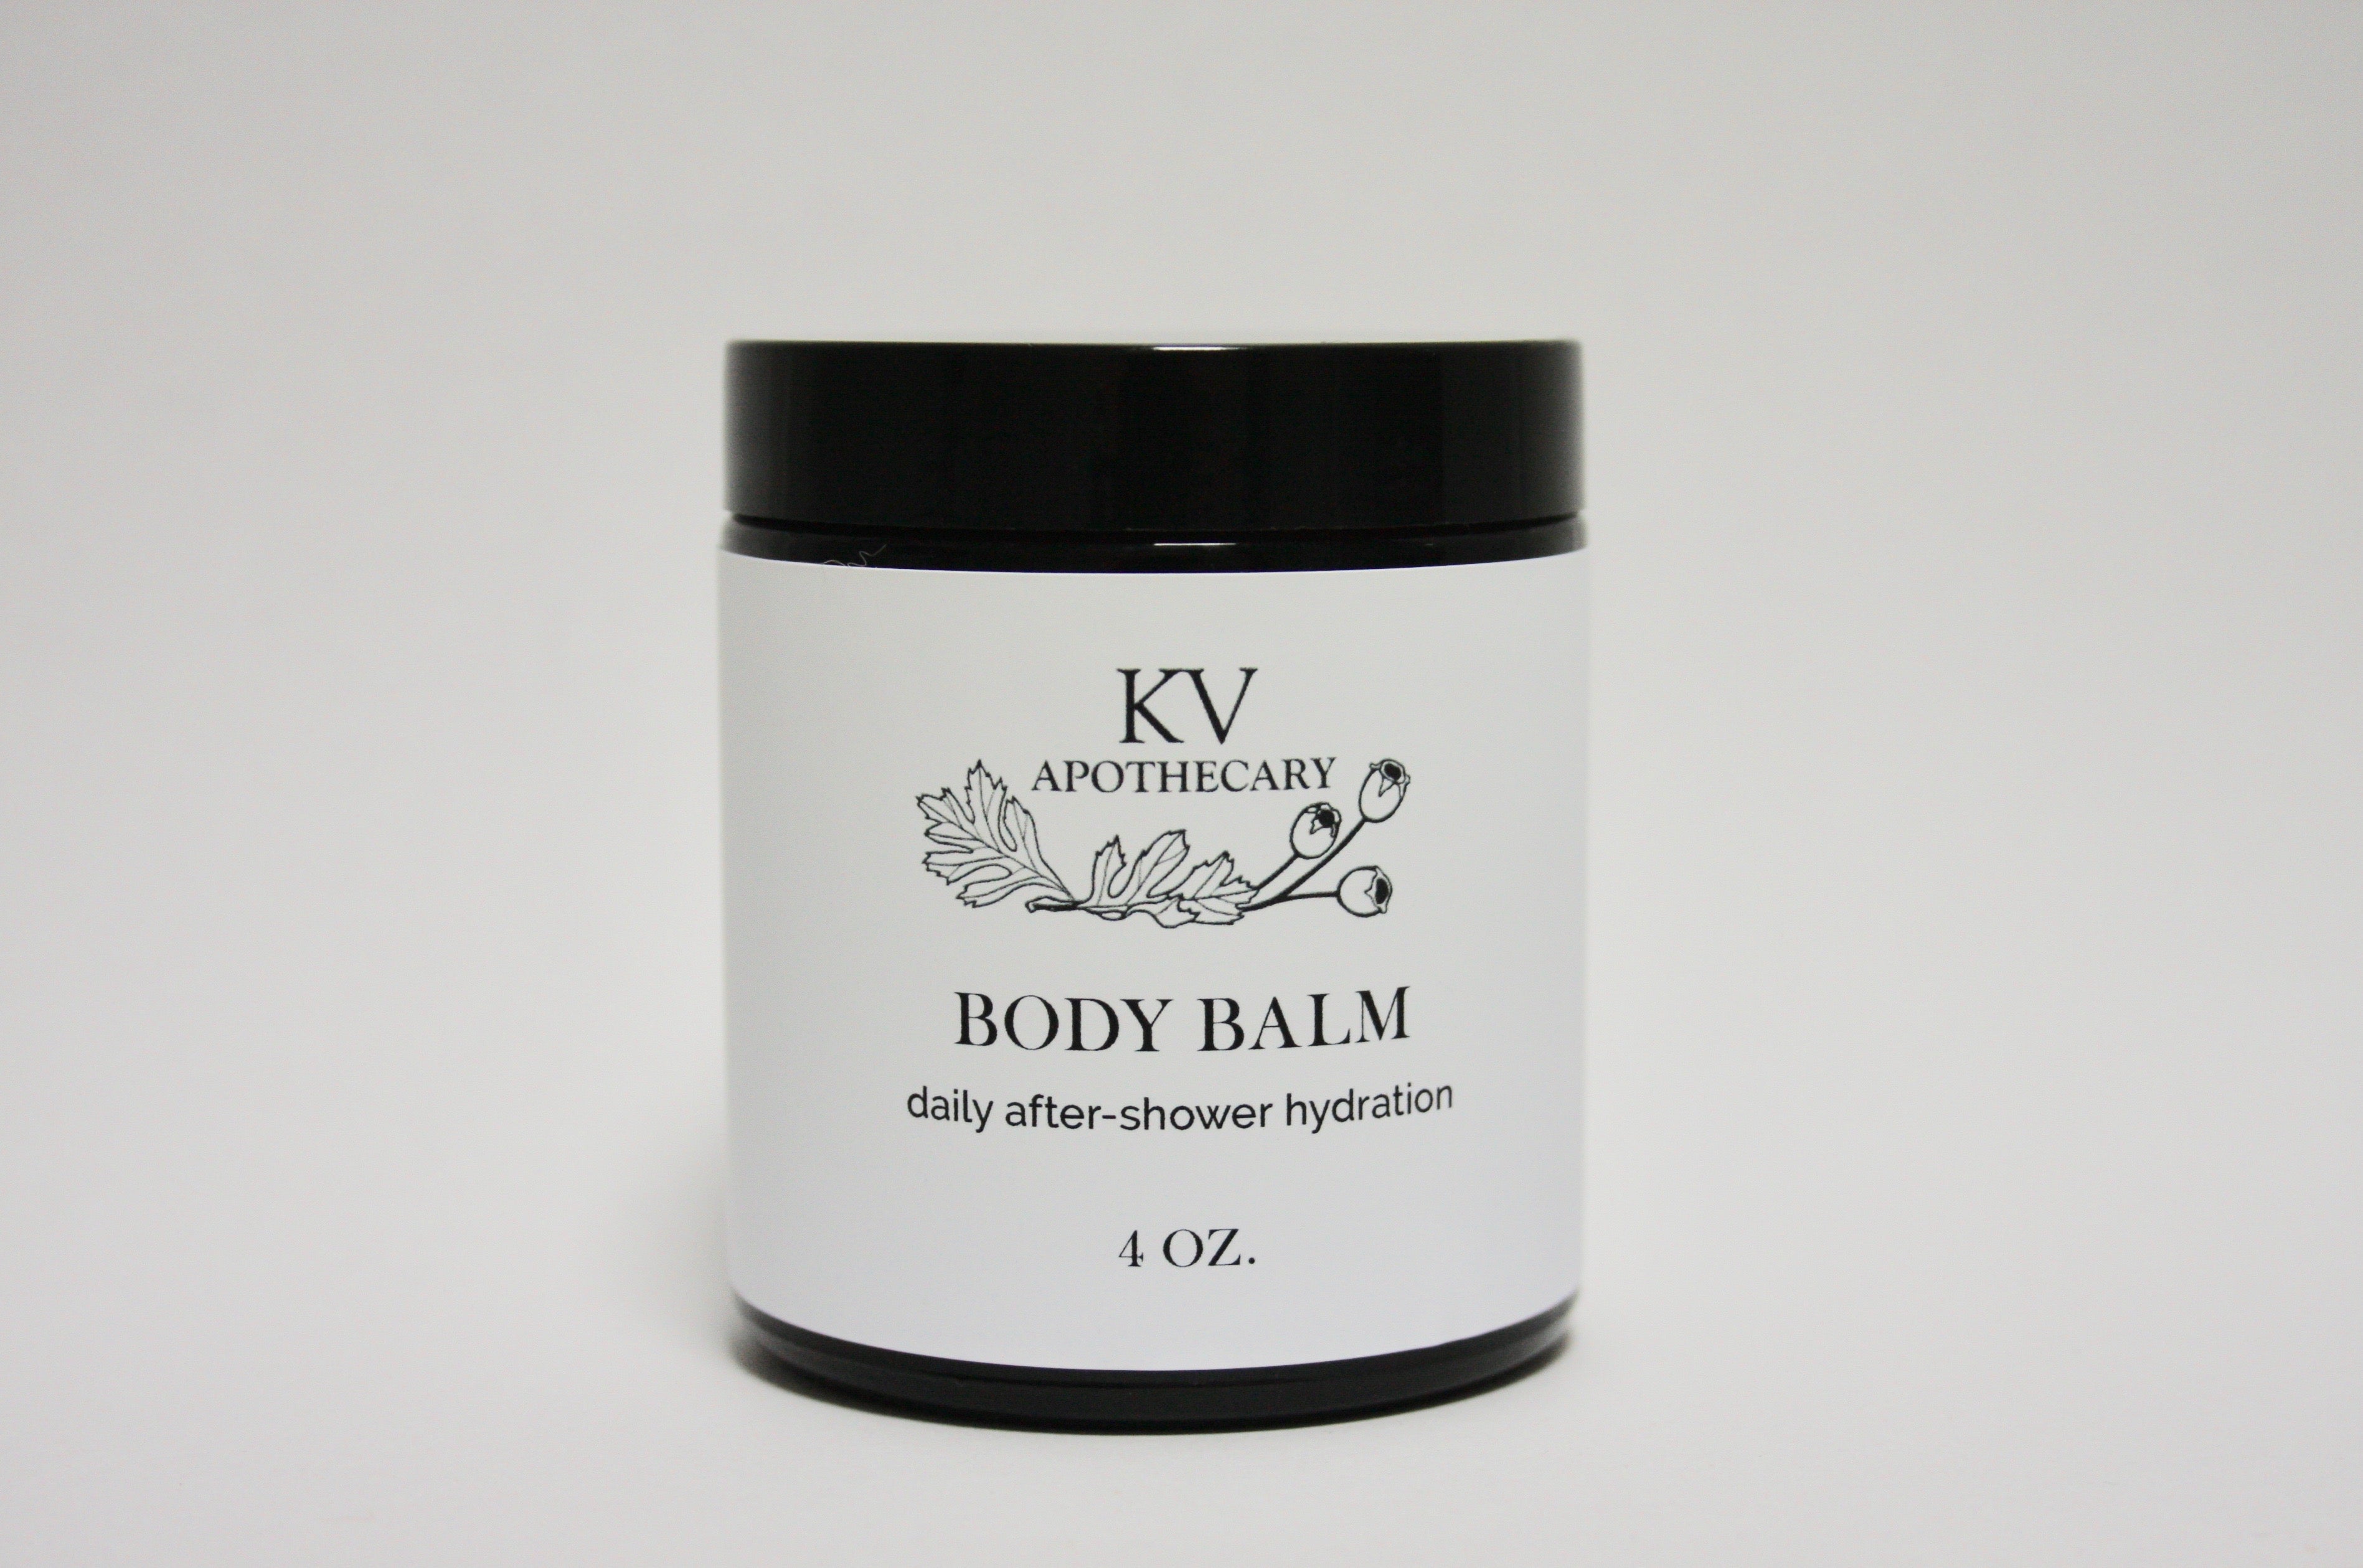 After-Shower Body Balm